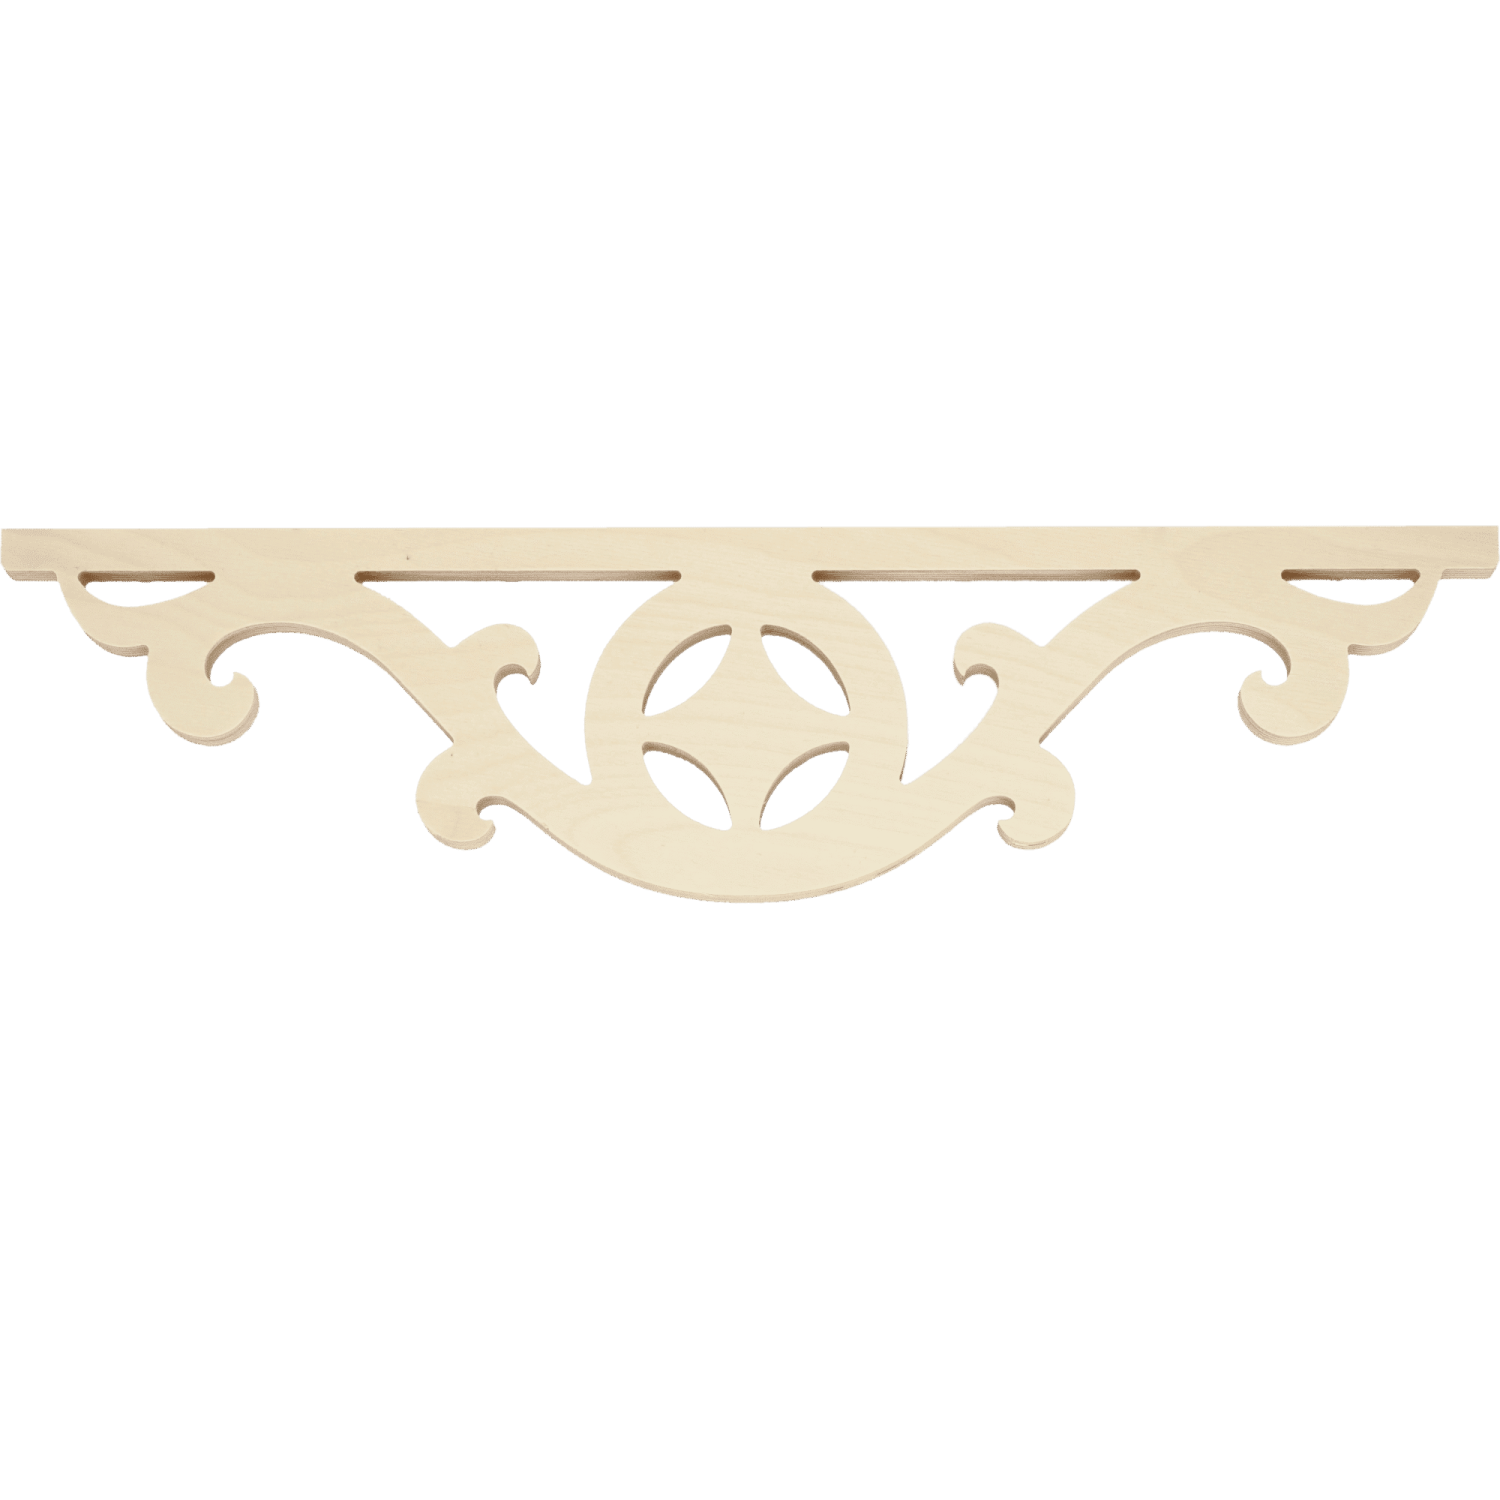 Middle bracket 008 - Classic wooden corbel & bracket buddy with ornaments for porch and veranda.